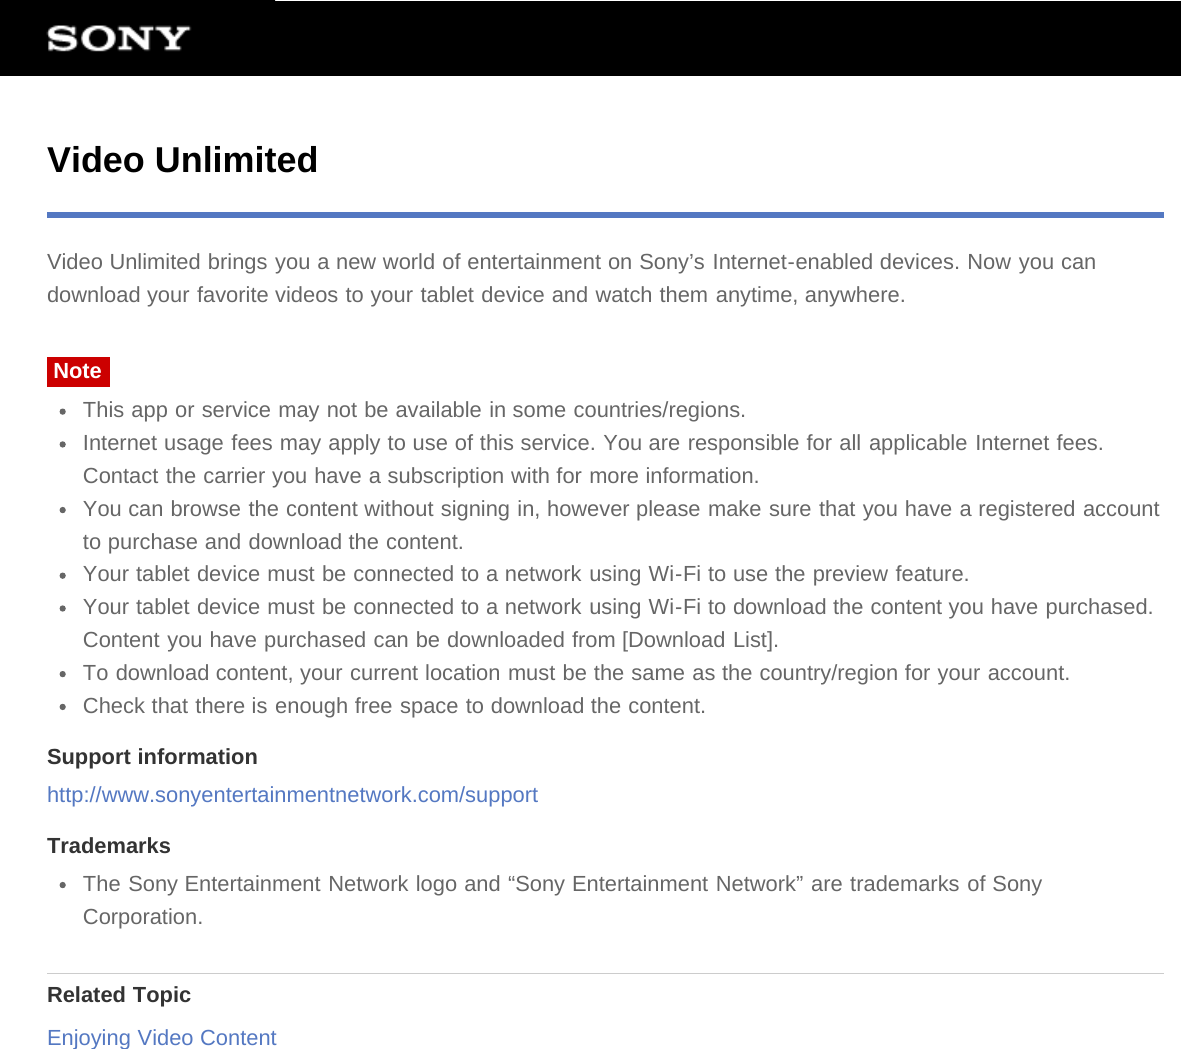 Video UnlimitedVideo Unlimited brings you a new world of entertainment on Sony’s Internet-enabled devices. Now you candownload your favorite videos to your tablet device and watch them anytime, anywhere.NoteThis app or service may not be available in some countries/regions.Internet usage fees may apply to use of this service. You are responsible for all applicable Internet fees.Contact the carrier you have a subscription with for more information.You can browse the content without signing in, however please make sure that you have a registered accountto purchase and download the content.Your tablet device must be connected to a network using Wi-Fi to use the preview feature.Your tablet device must be connected to a network using Wi-Fi to download the content you have purchased.Content you have purchased can be downloaded from [Download List].To download content, your current location must be the same as the country/region for your account.Check that there is enough free space to download the content.Support informationhttp://www.sonyentertainmentnetwork.com/supportTrademarksThe Sony Entertainment Network logo and “Sony Entertainment Network” are trademarks of SonyCorporation.Related TopicEnjoying Video Content